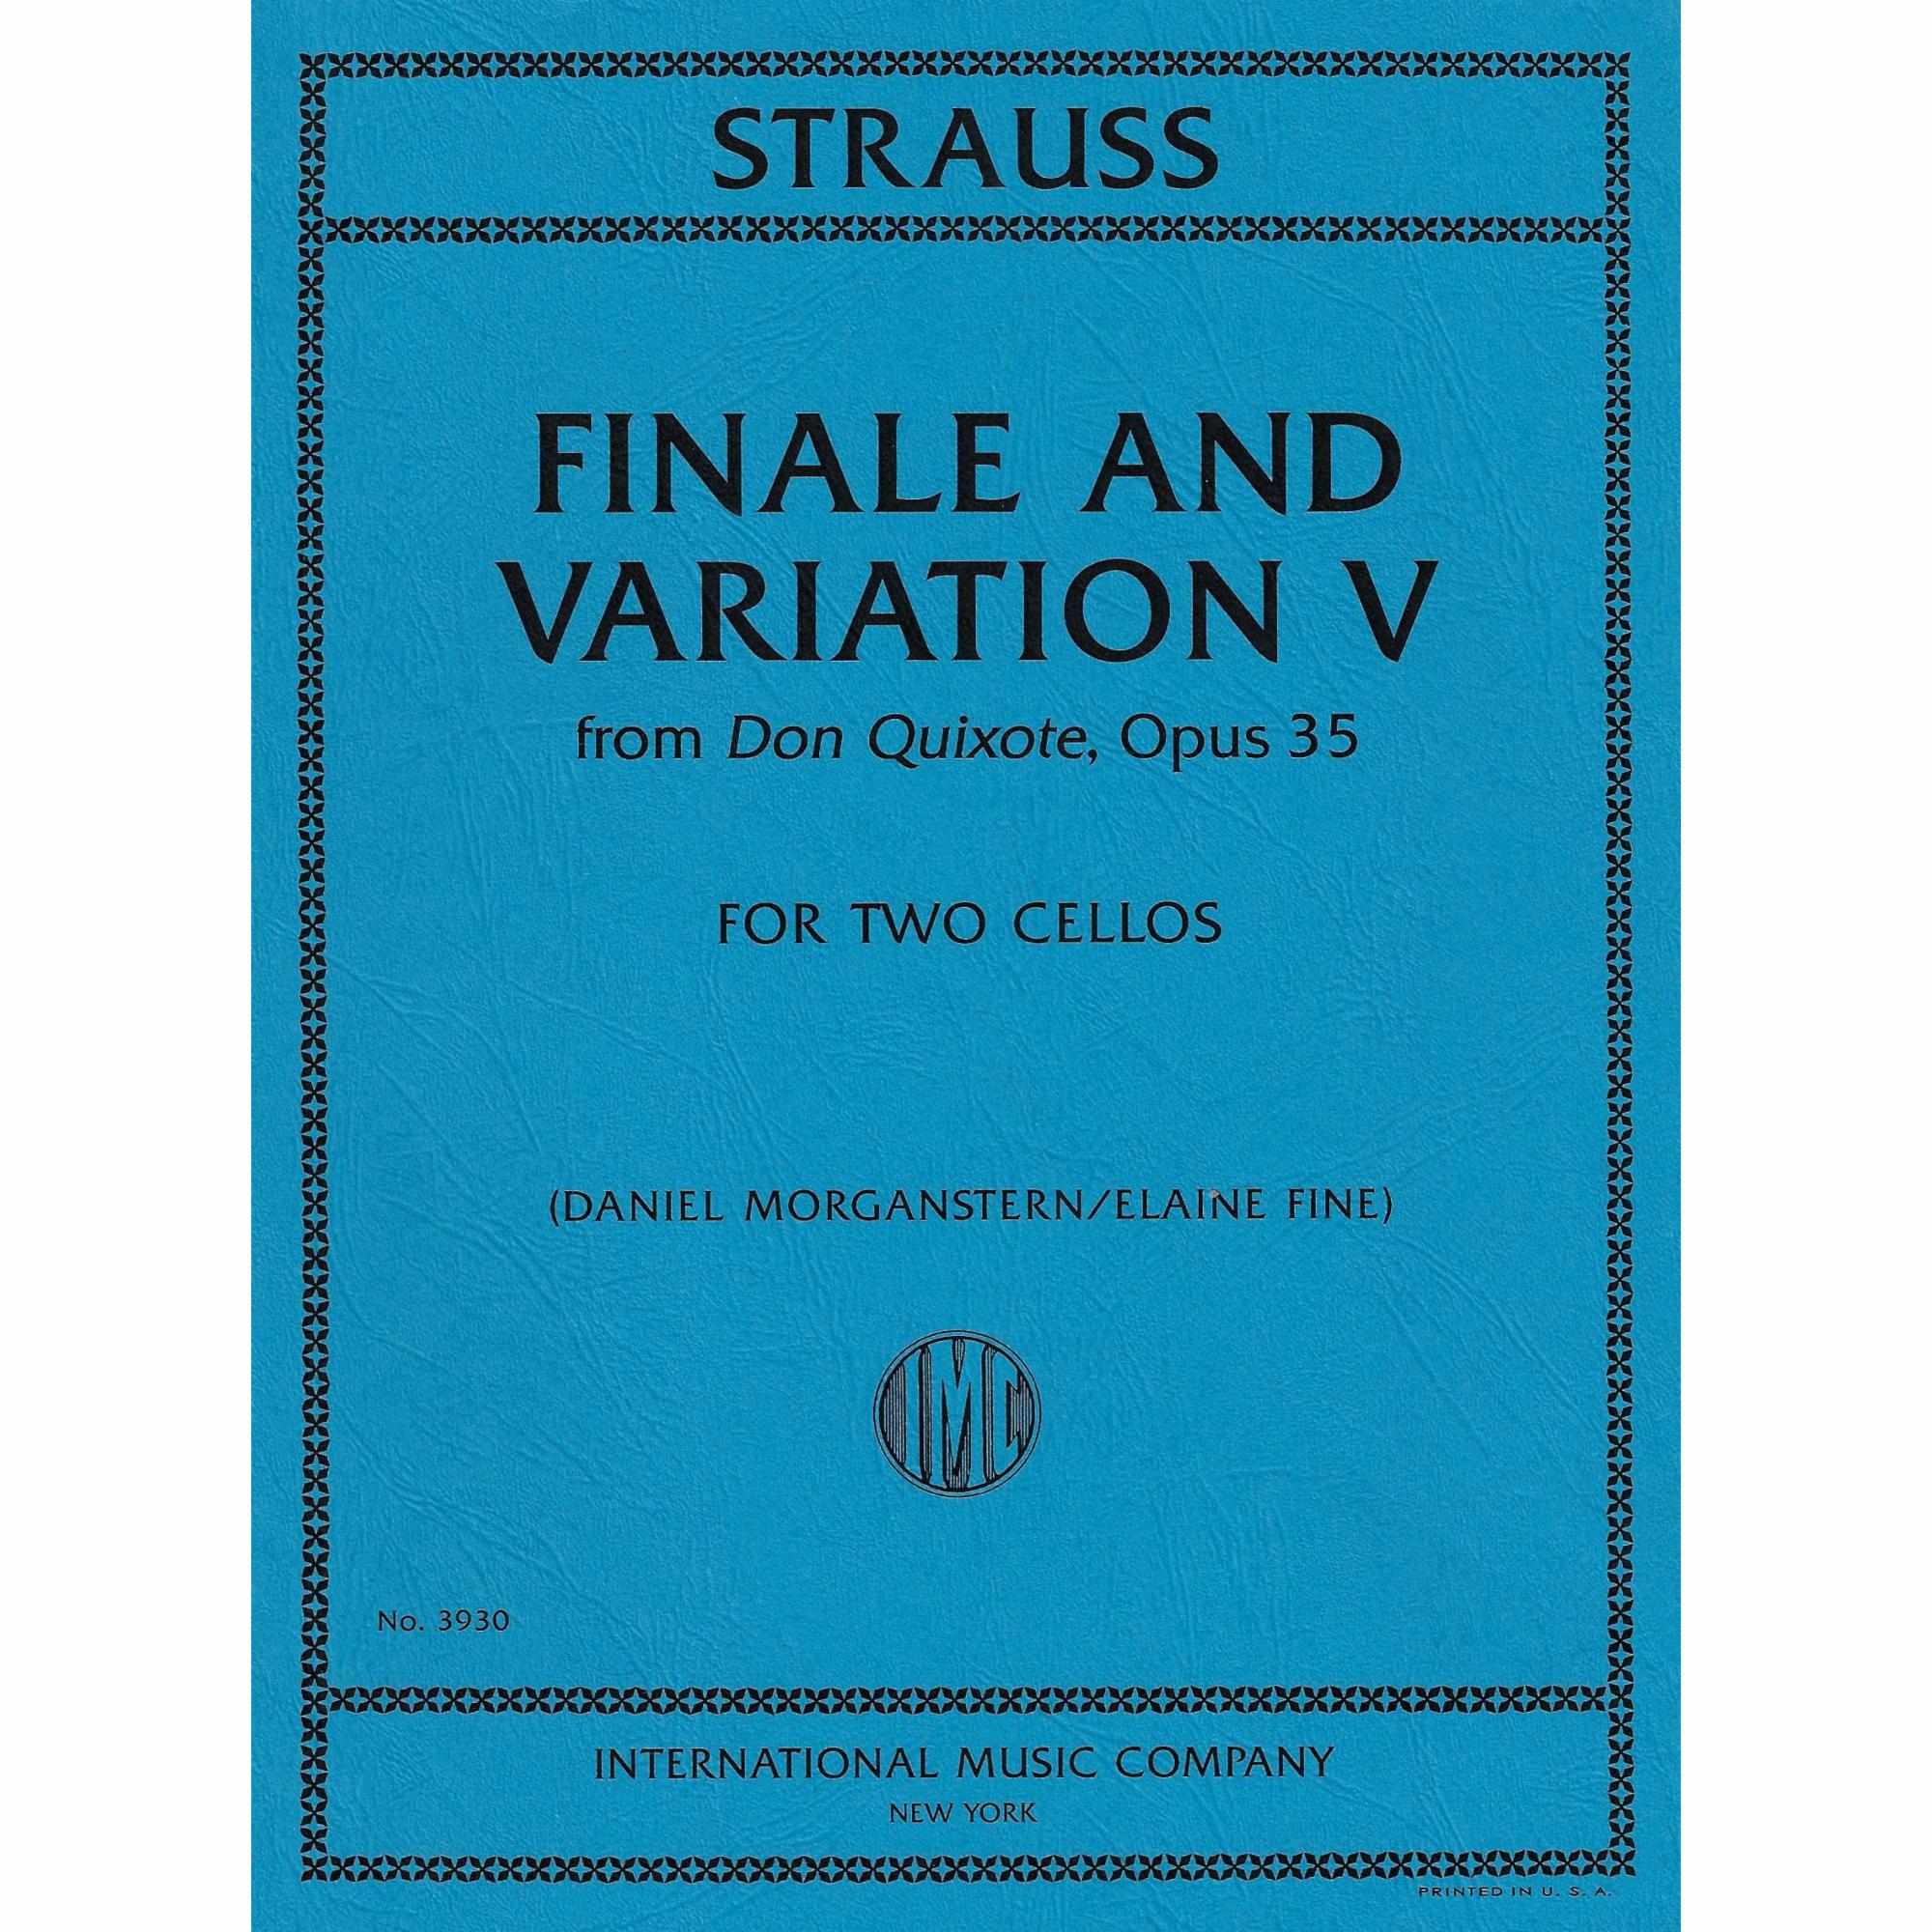 Strauss -- Finale and Variation V, from Don Quixote for Two Cellos